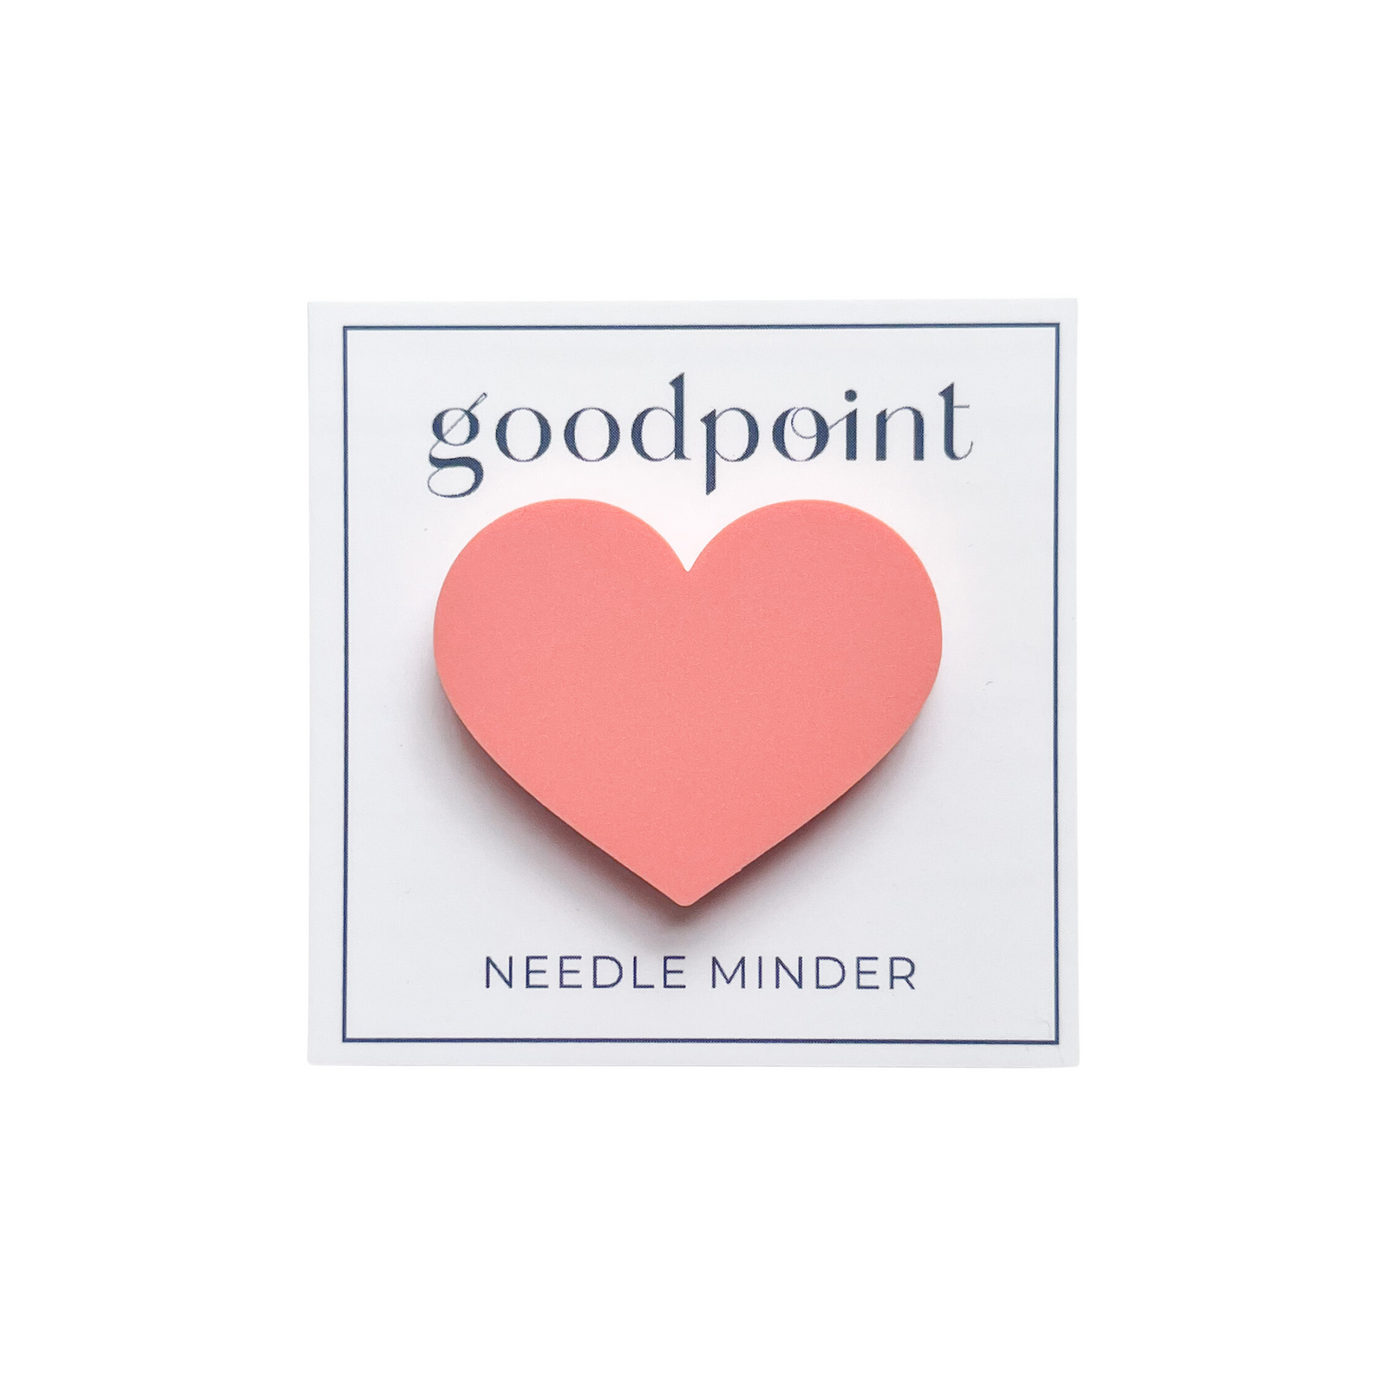 White card stock holds a pink heart magnet. The card contains the goodpoint logo at the top and the words " Needle Minder" at the bottom.